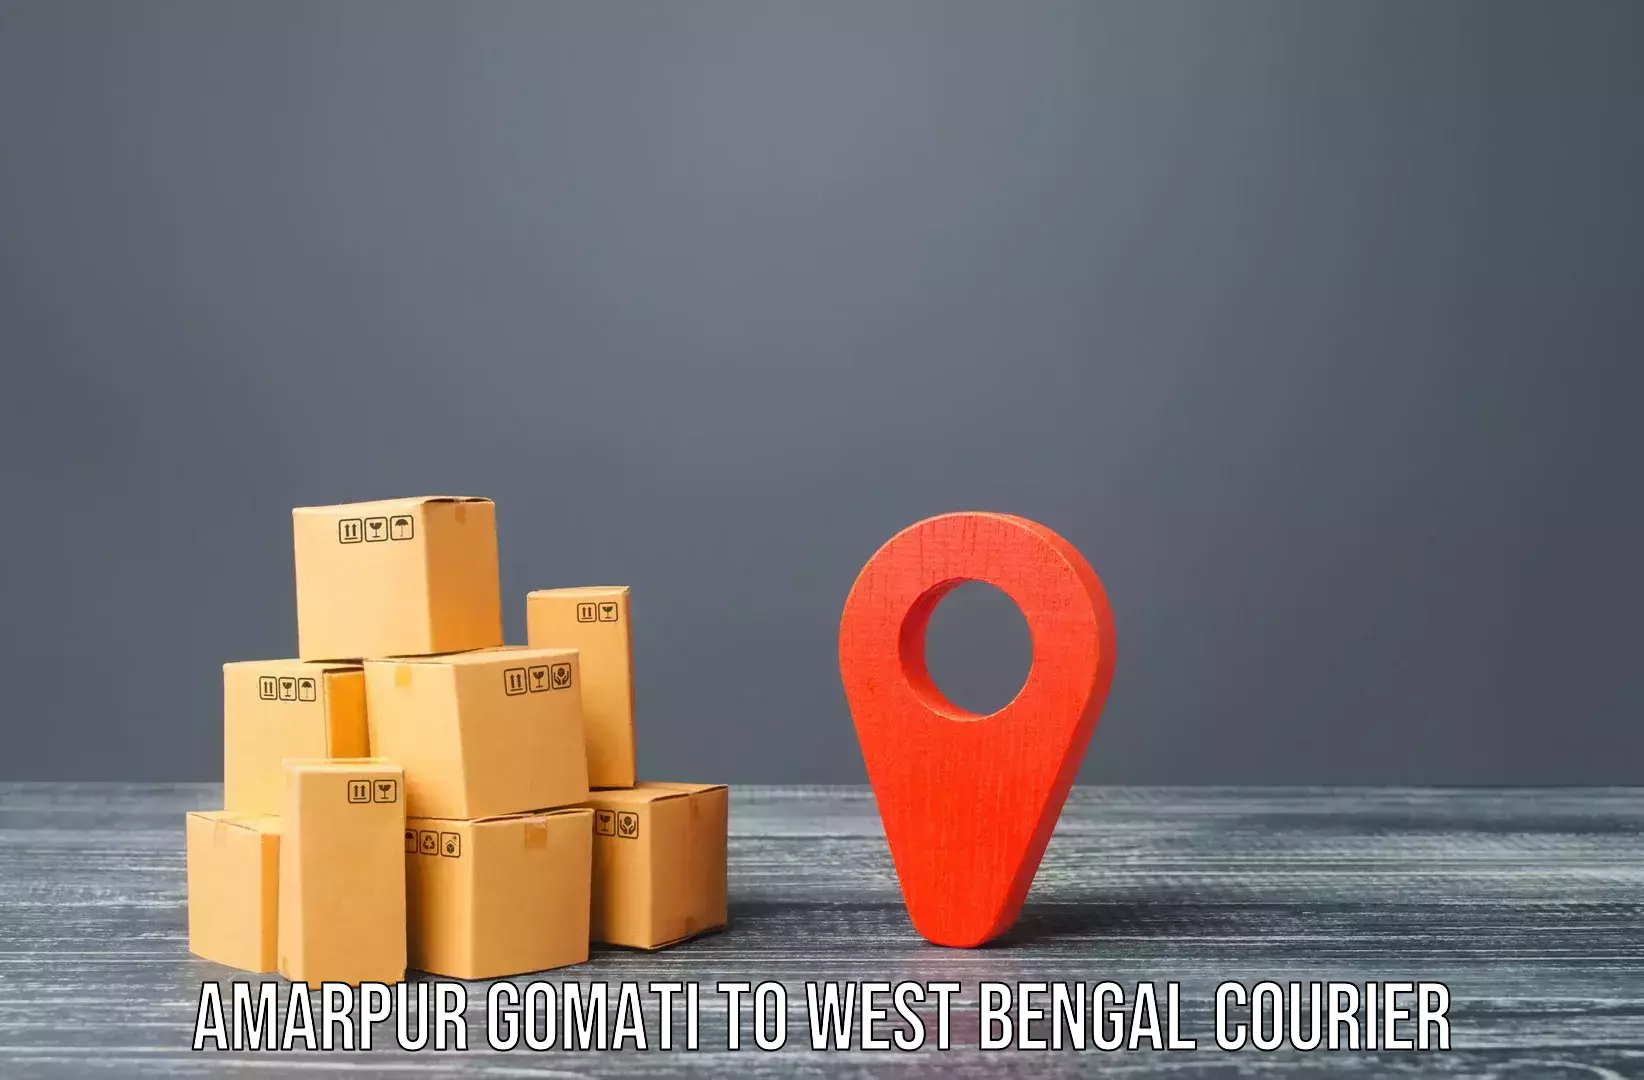 Nationwide moving services Amarpur Gomati to Midnapore